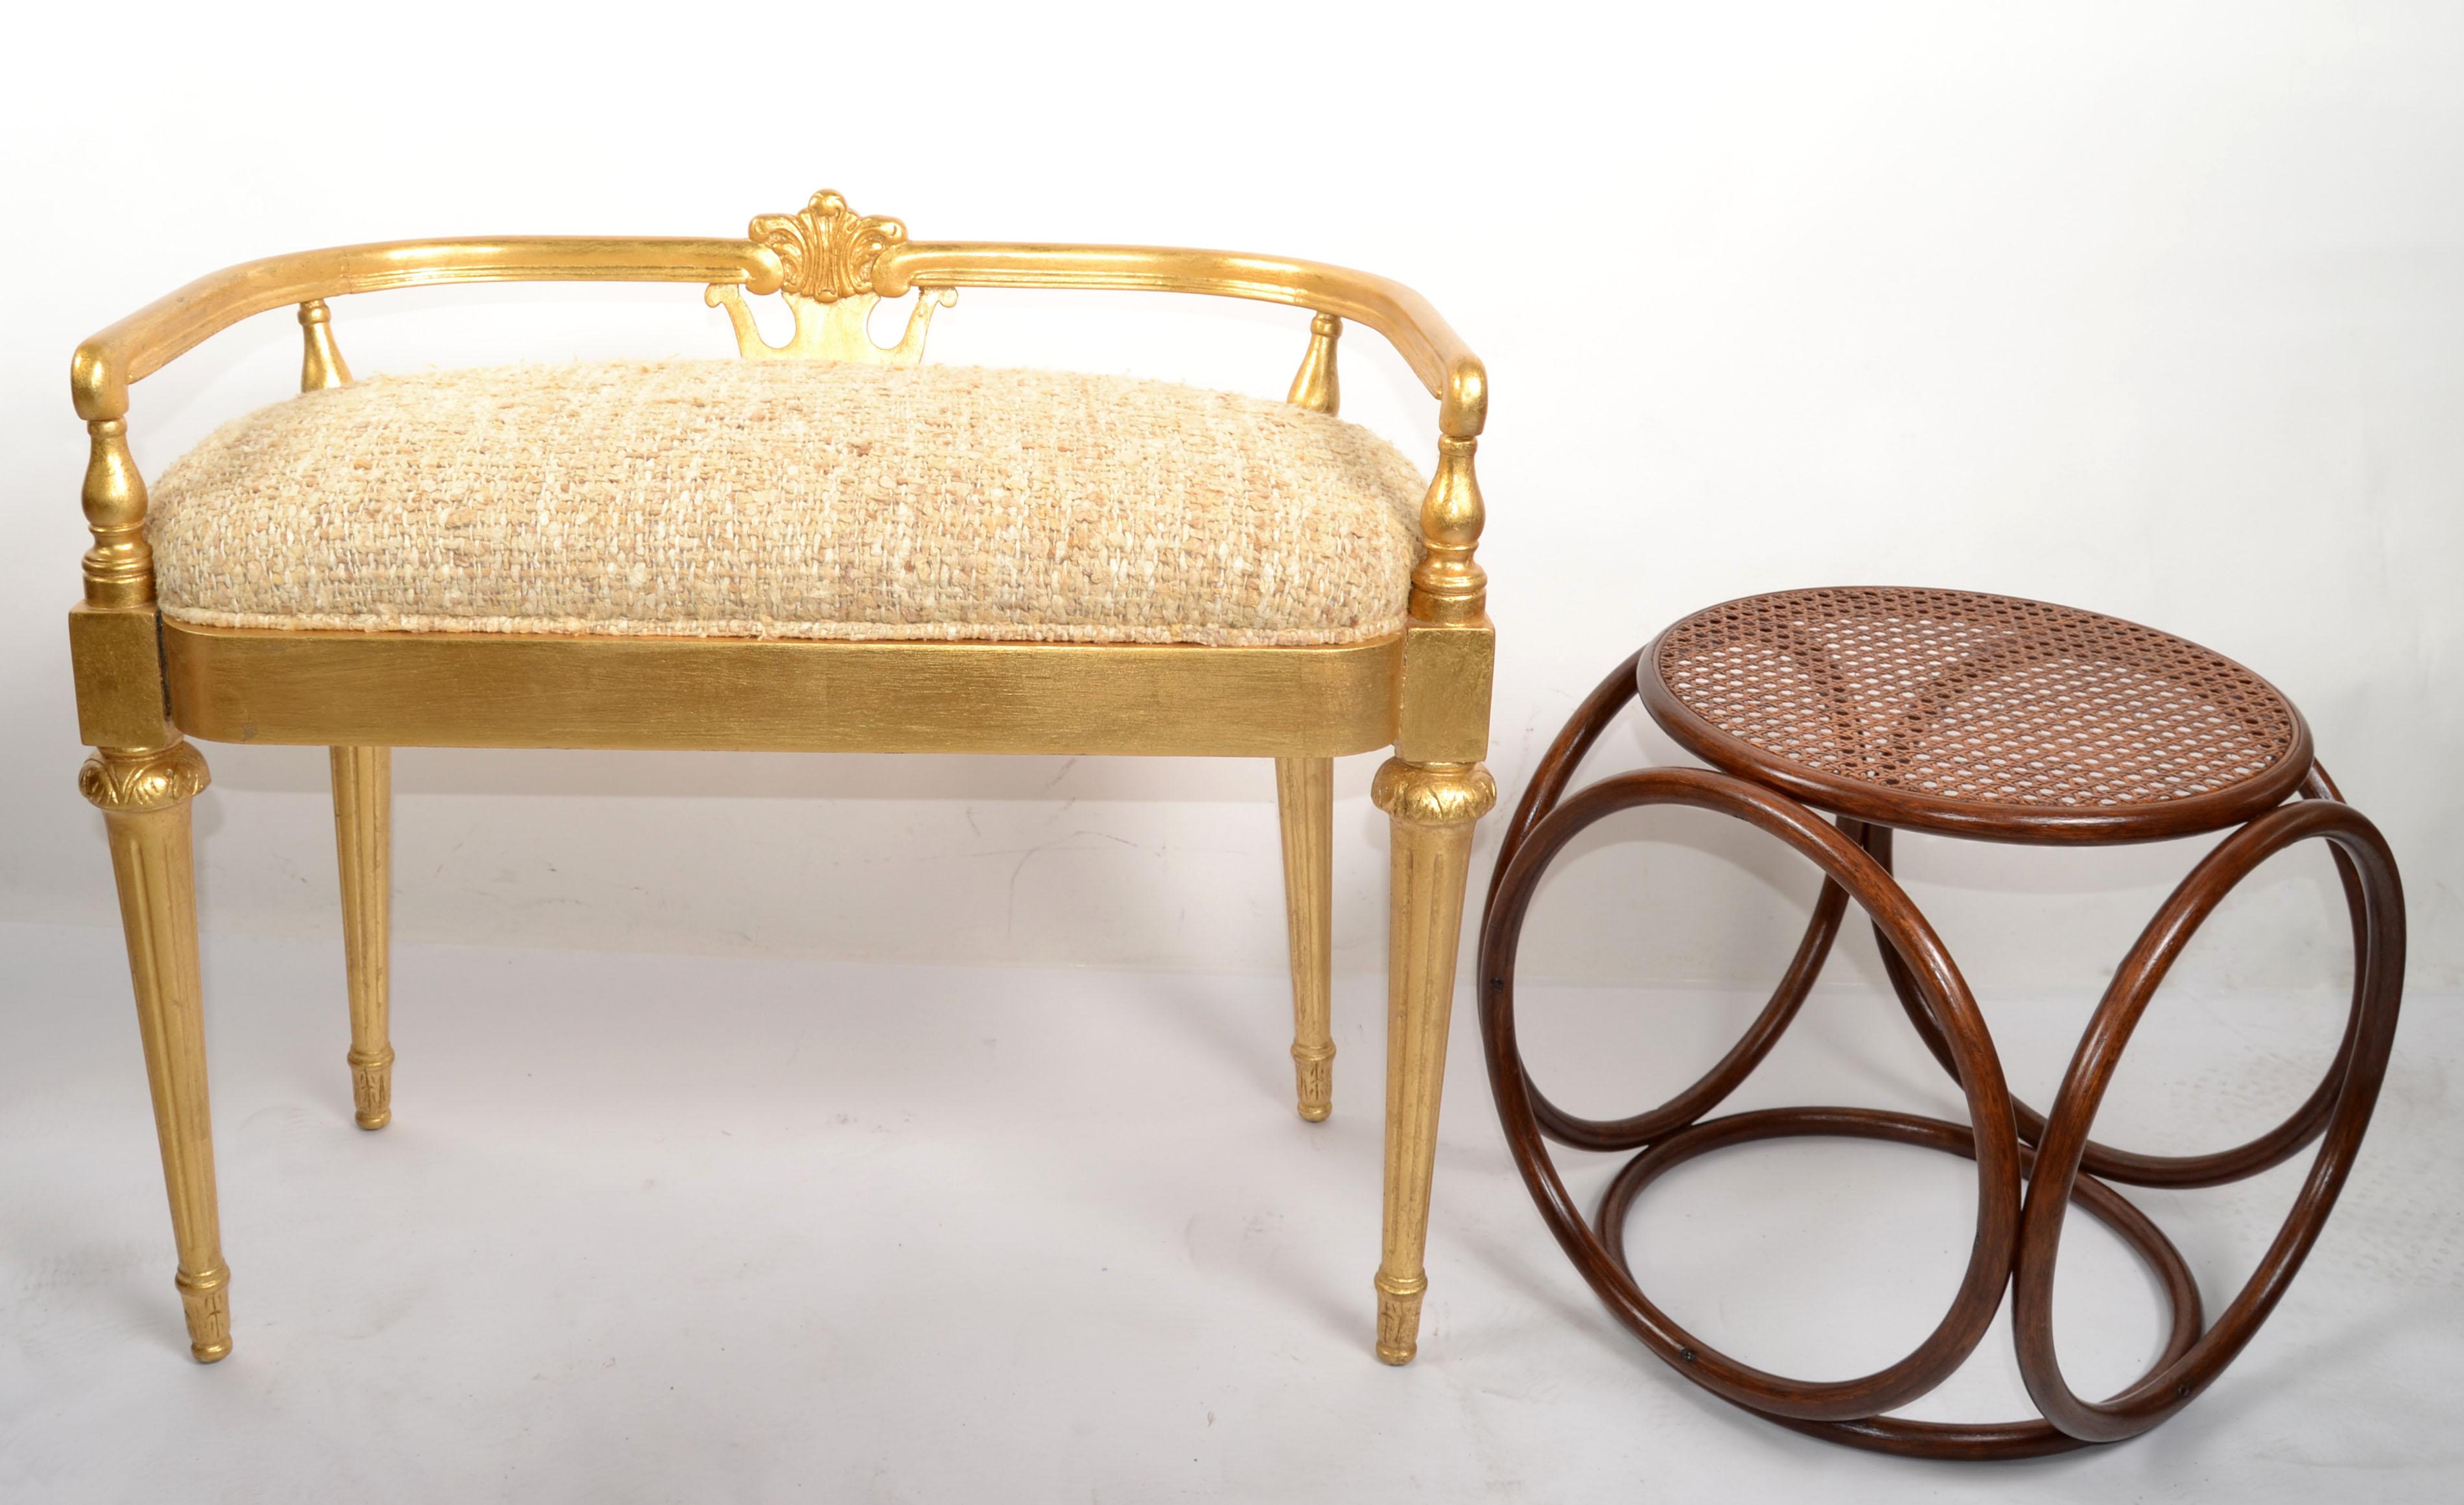 1950s French Louis XIV Style Hand Carved Giltwood Bench Wool Fabric Upholstery In Good Condition For Sale In Miami, FL